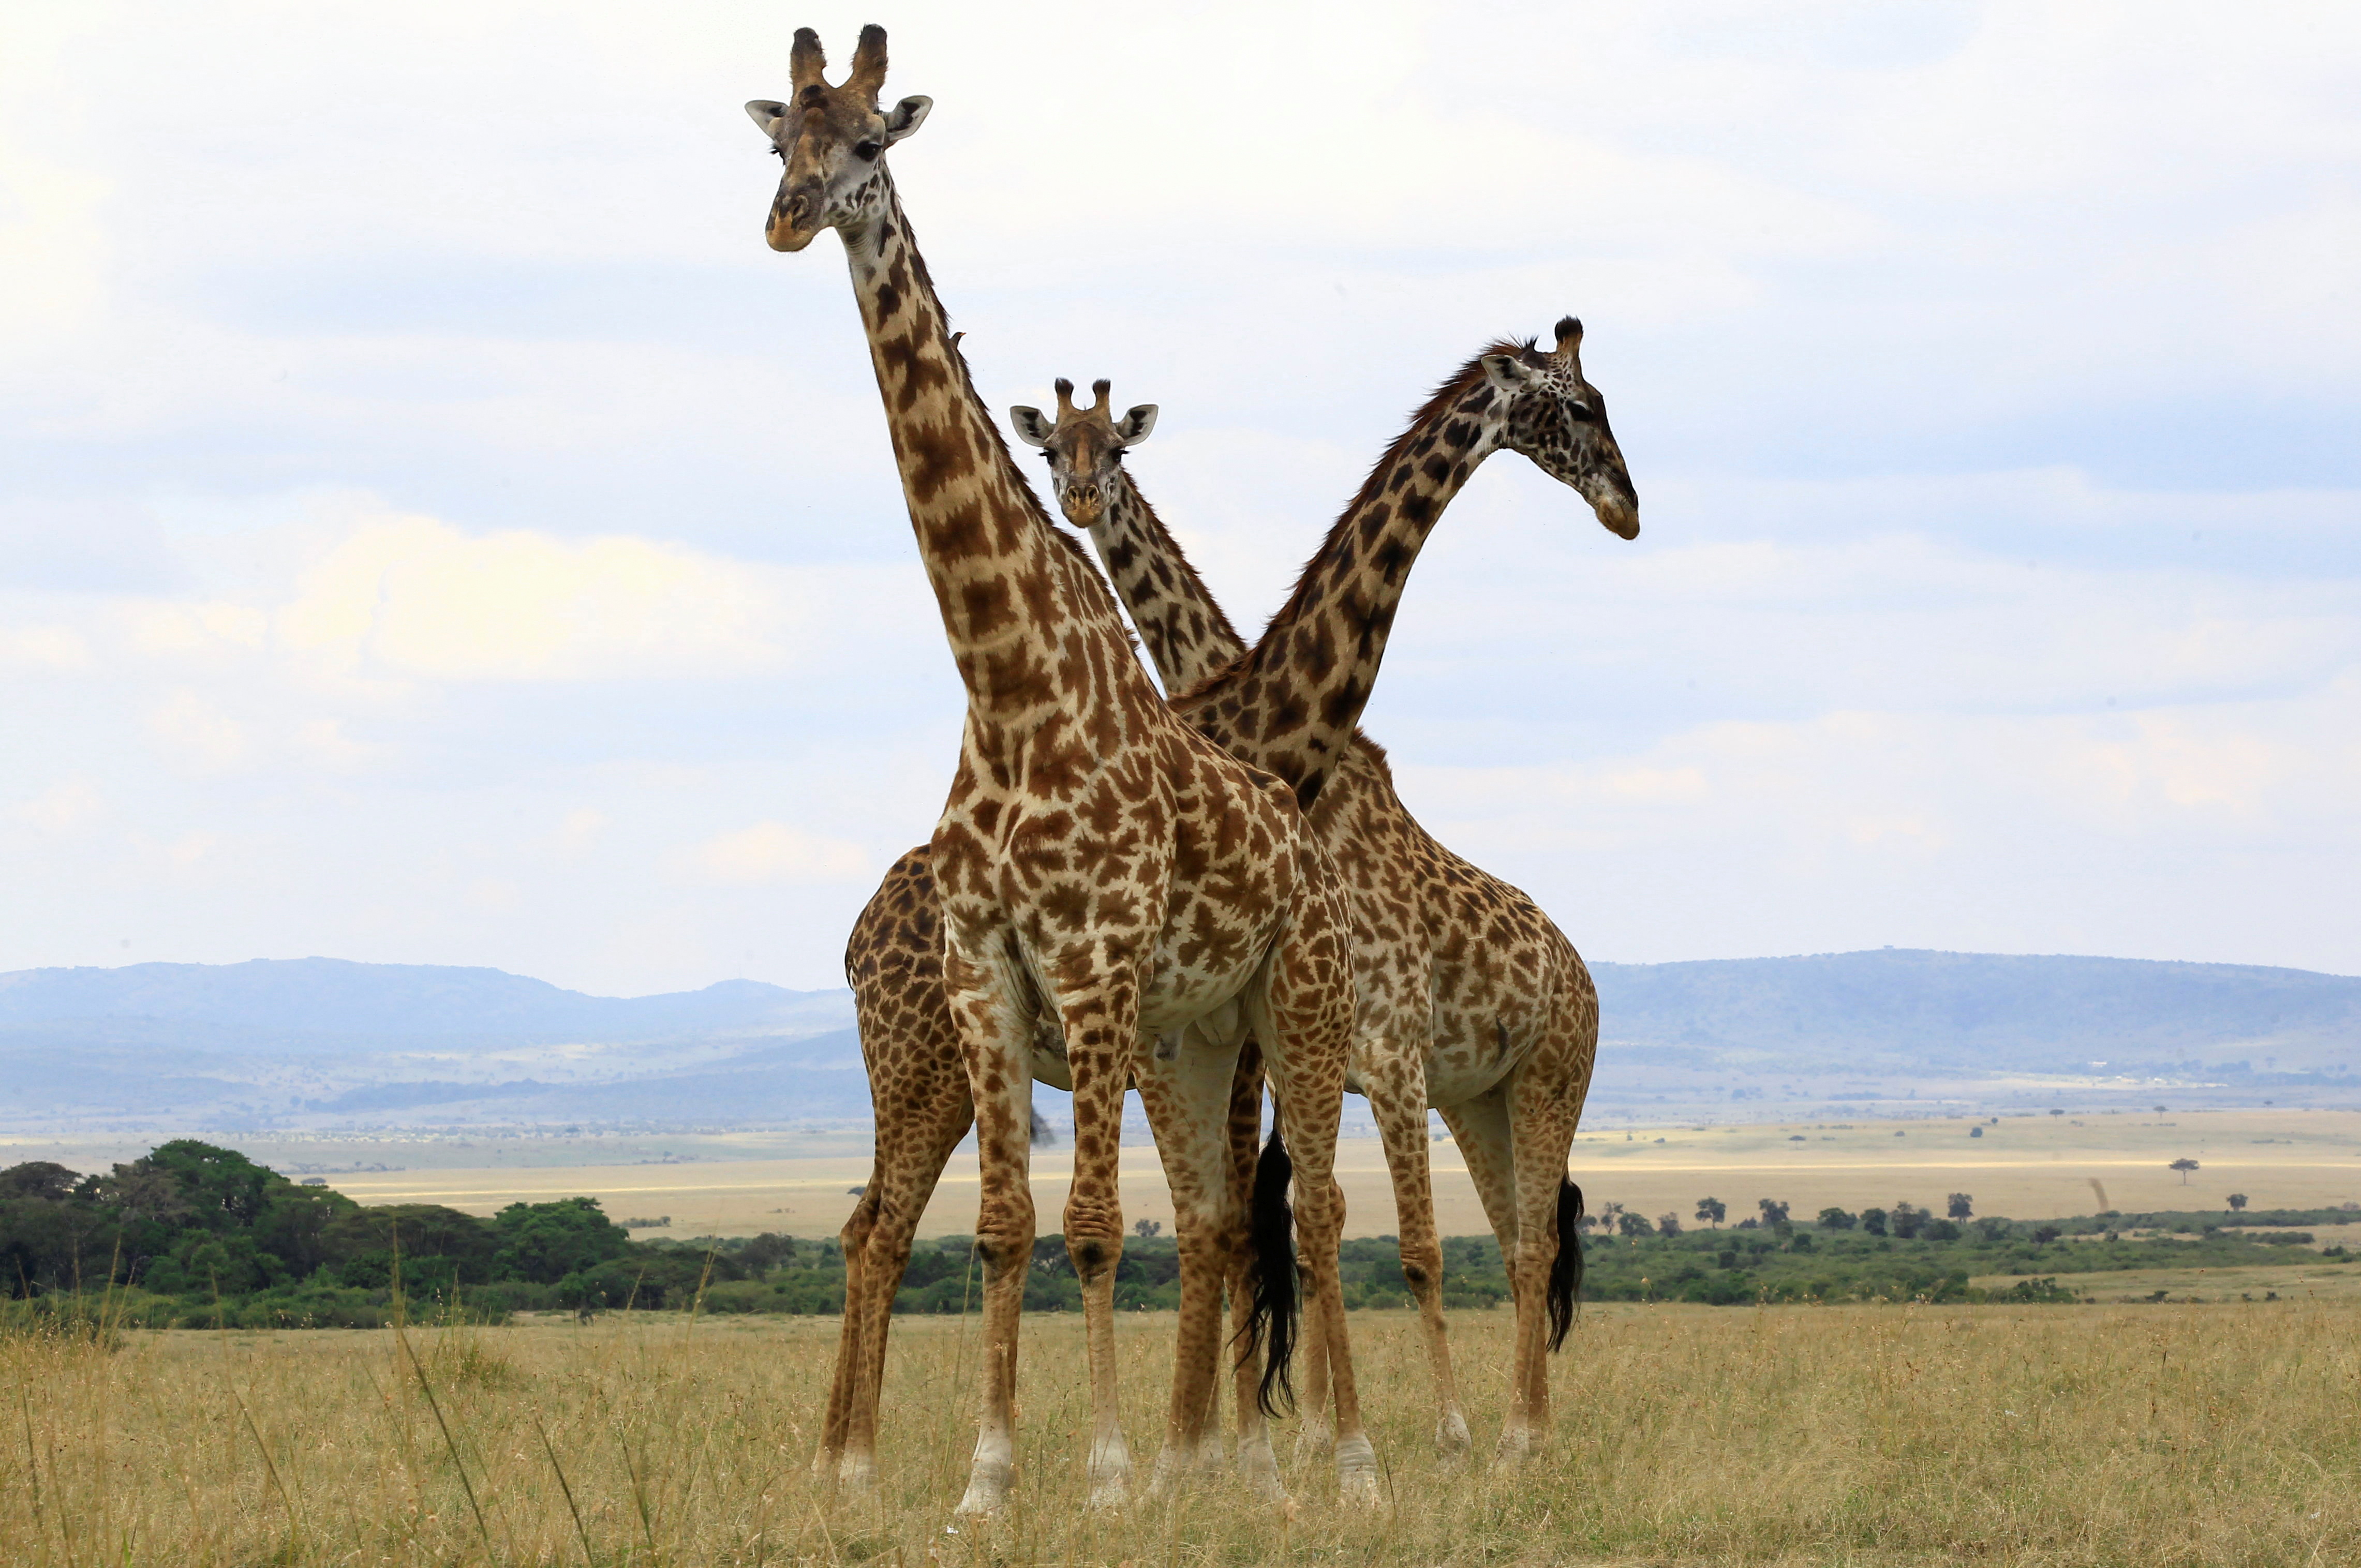 Giraffes stand together in the open plains at the Maasai Mara National Reserve in Narok County